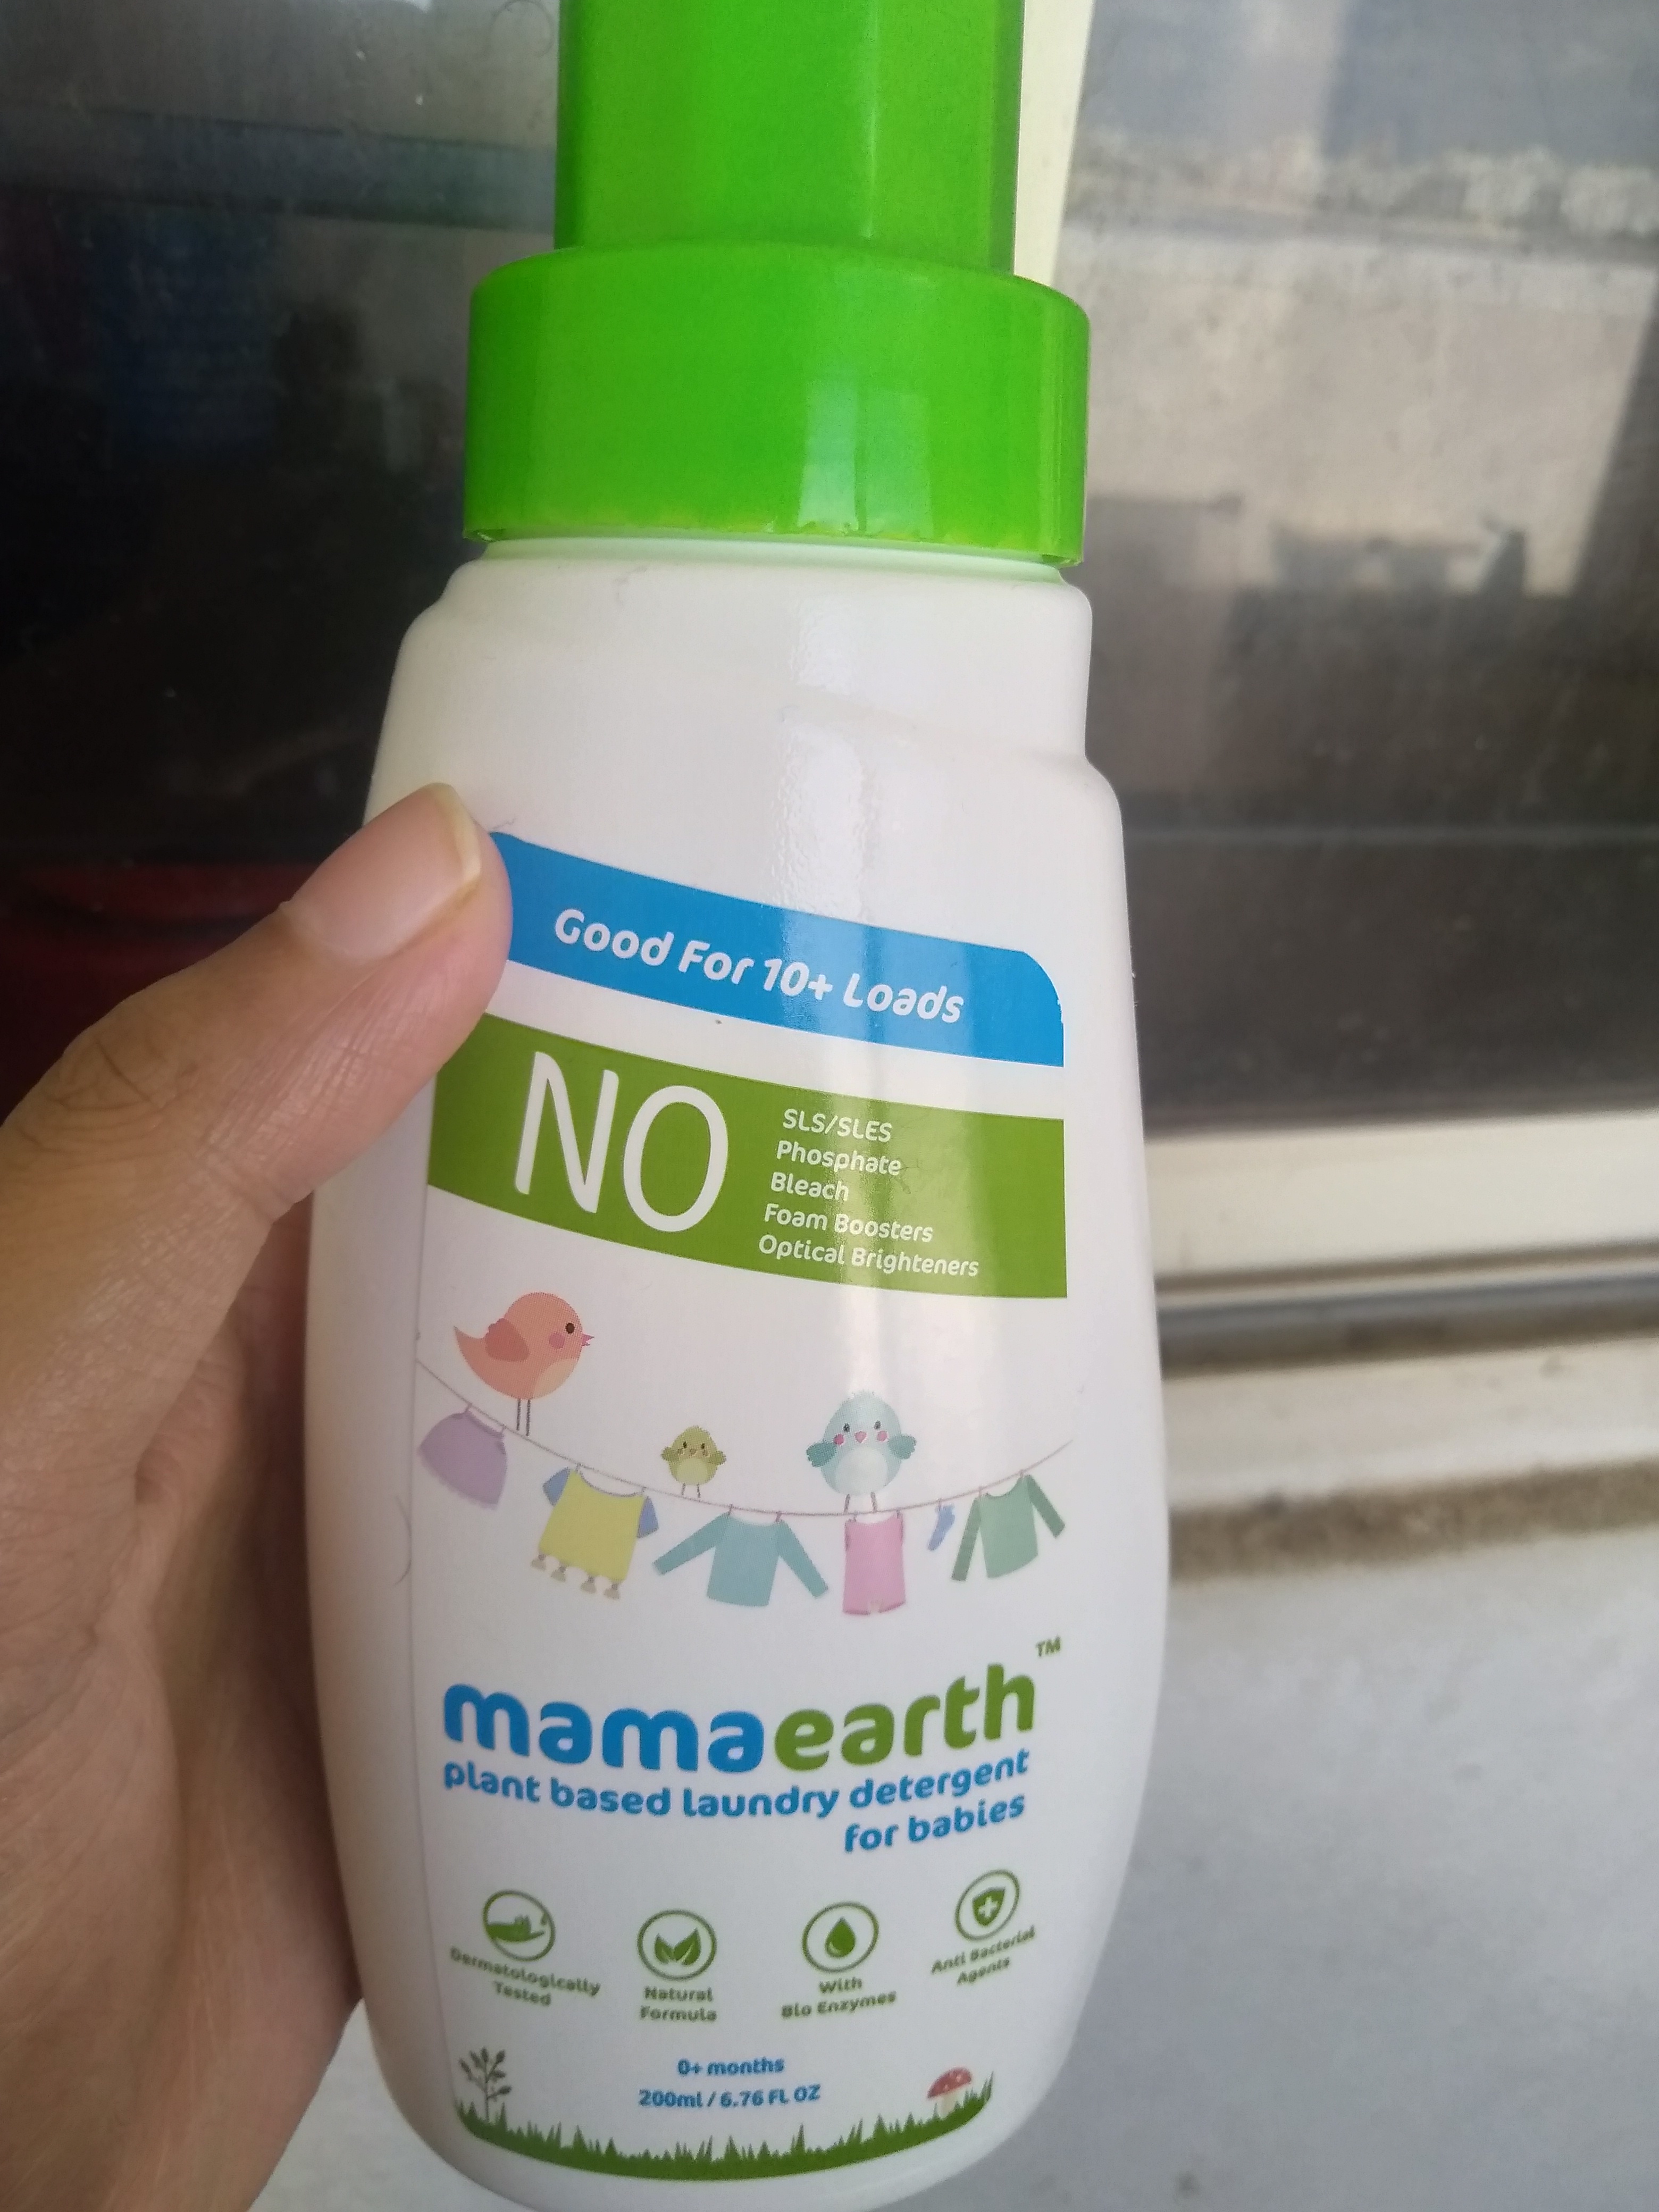 Mamaearth Plant Based Laundry Liquid Detergent For Babies Reviews ...